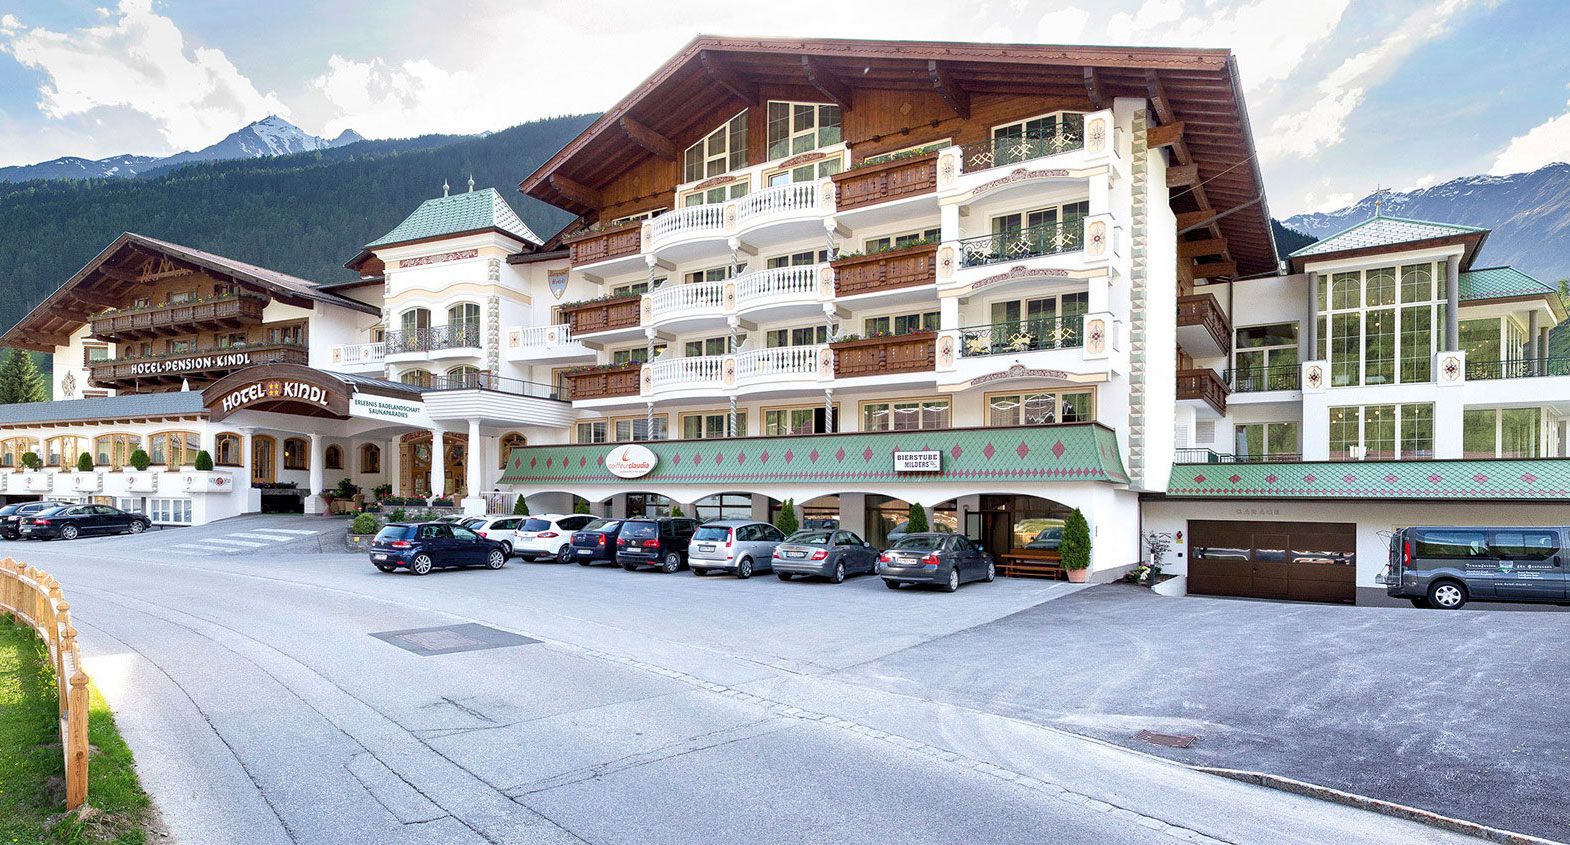 Holiday at the Alpenhotel Kindl in Neustift